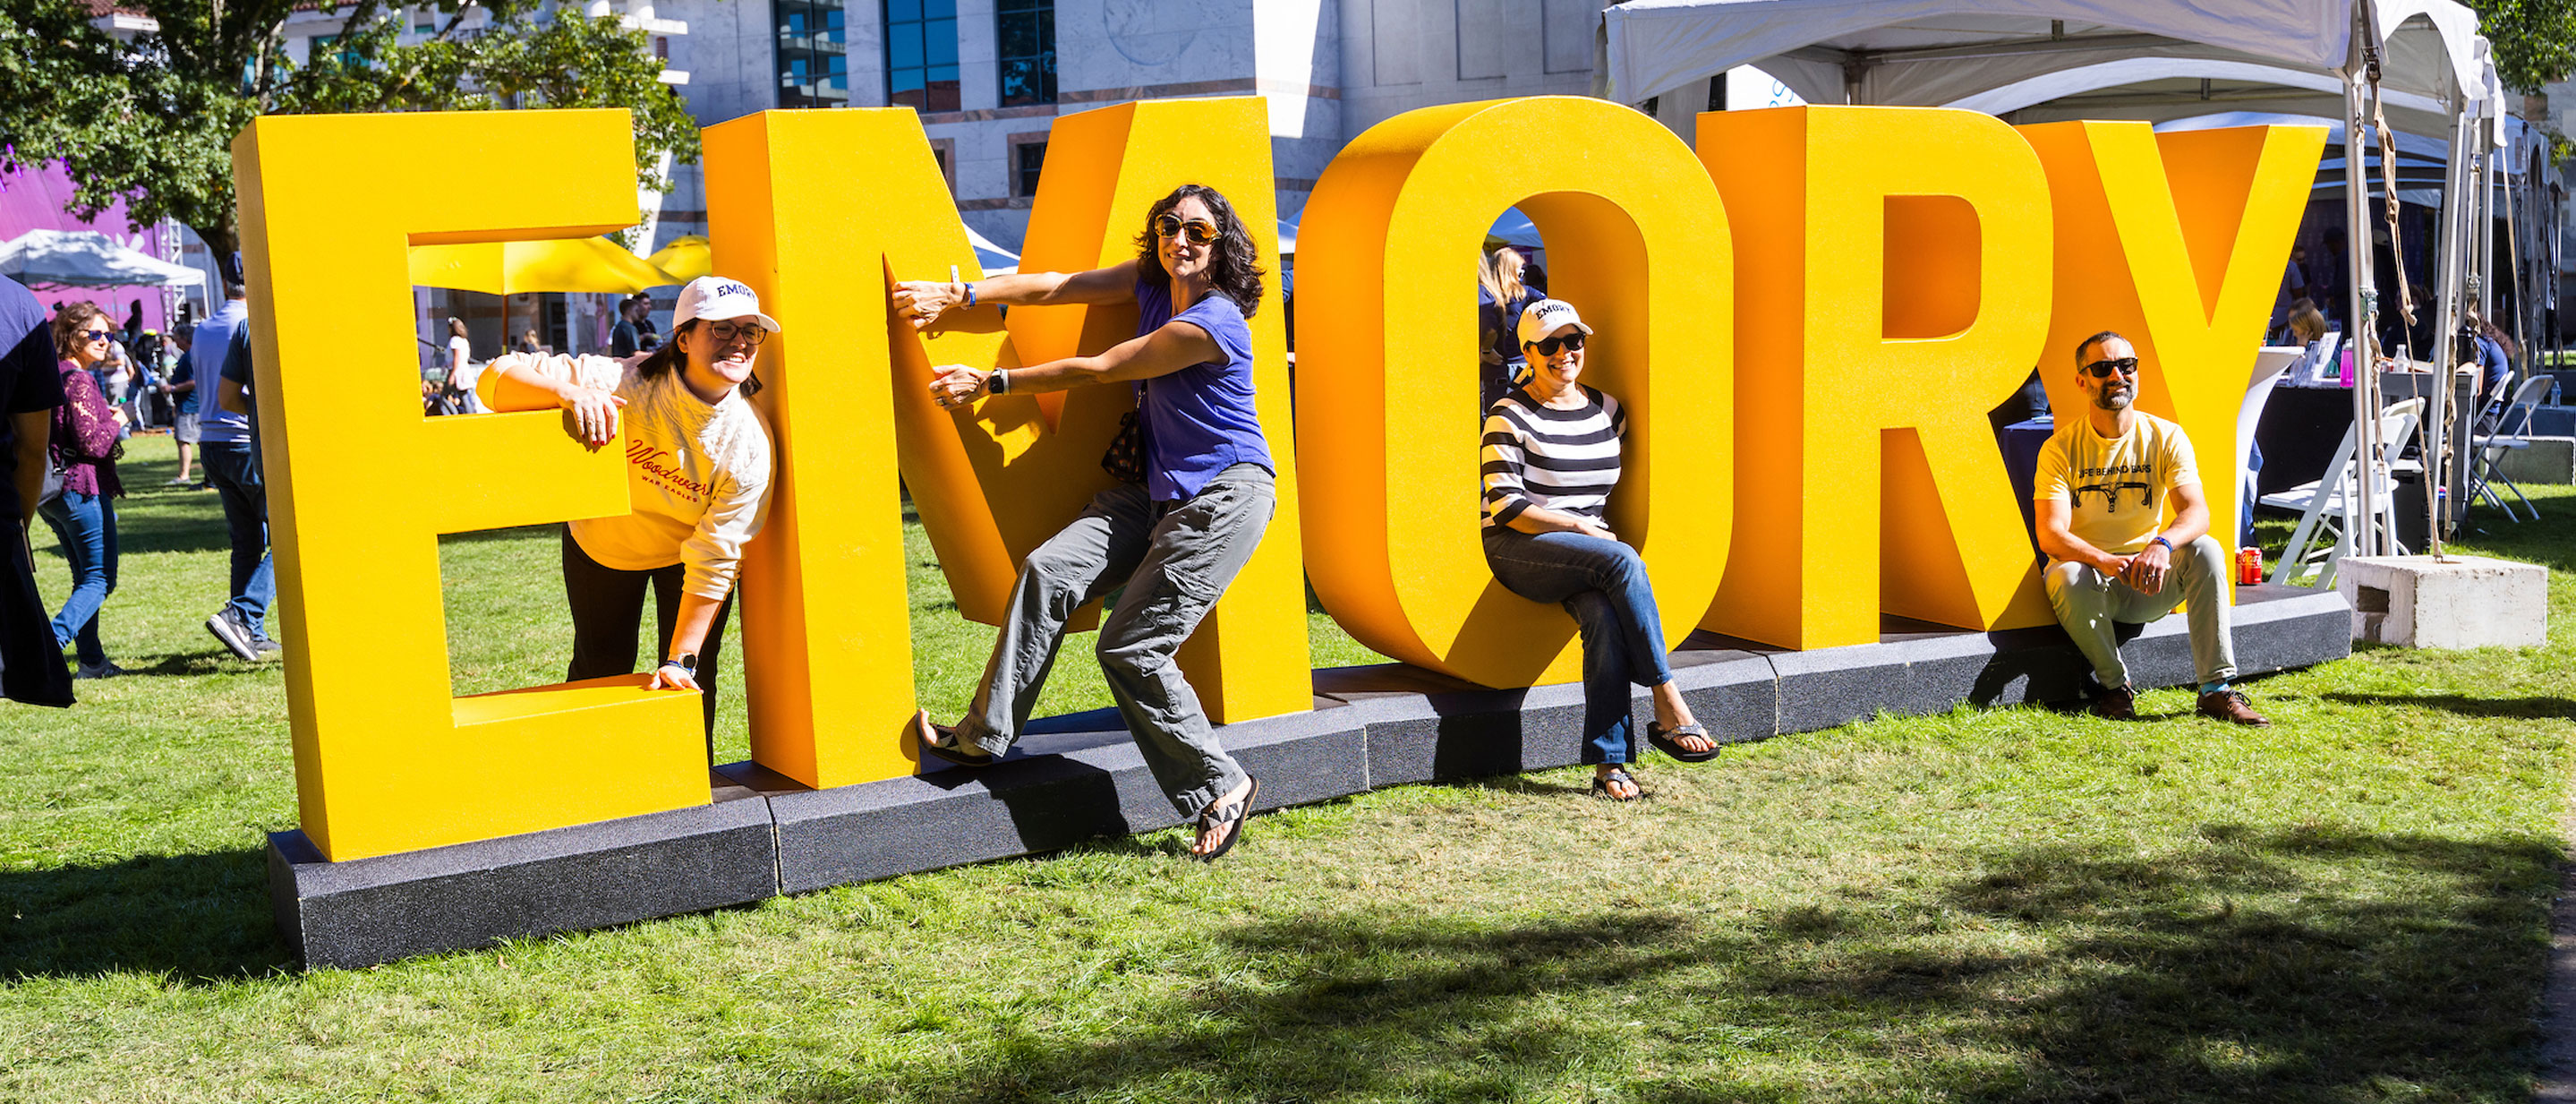 families pose by the big yellow emory letters